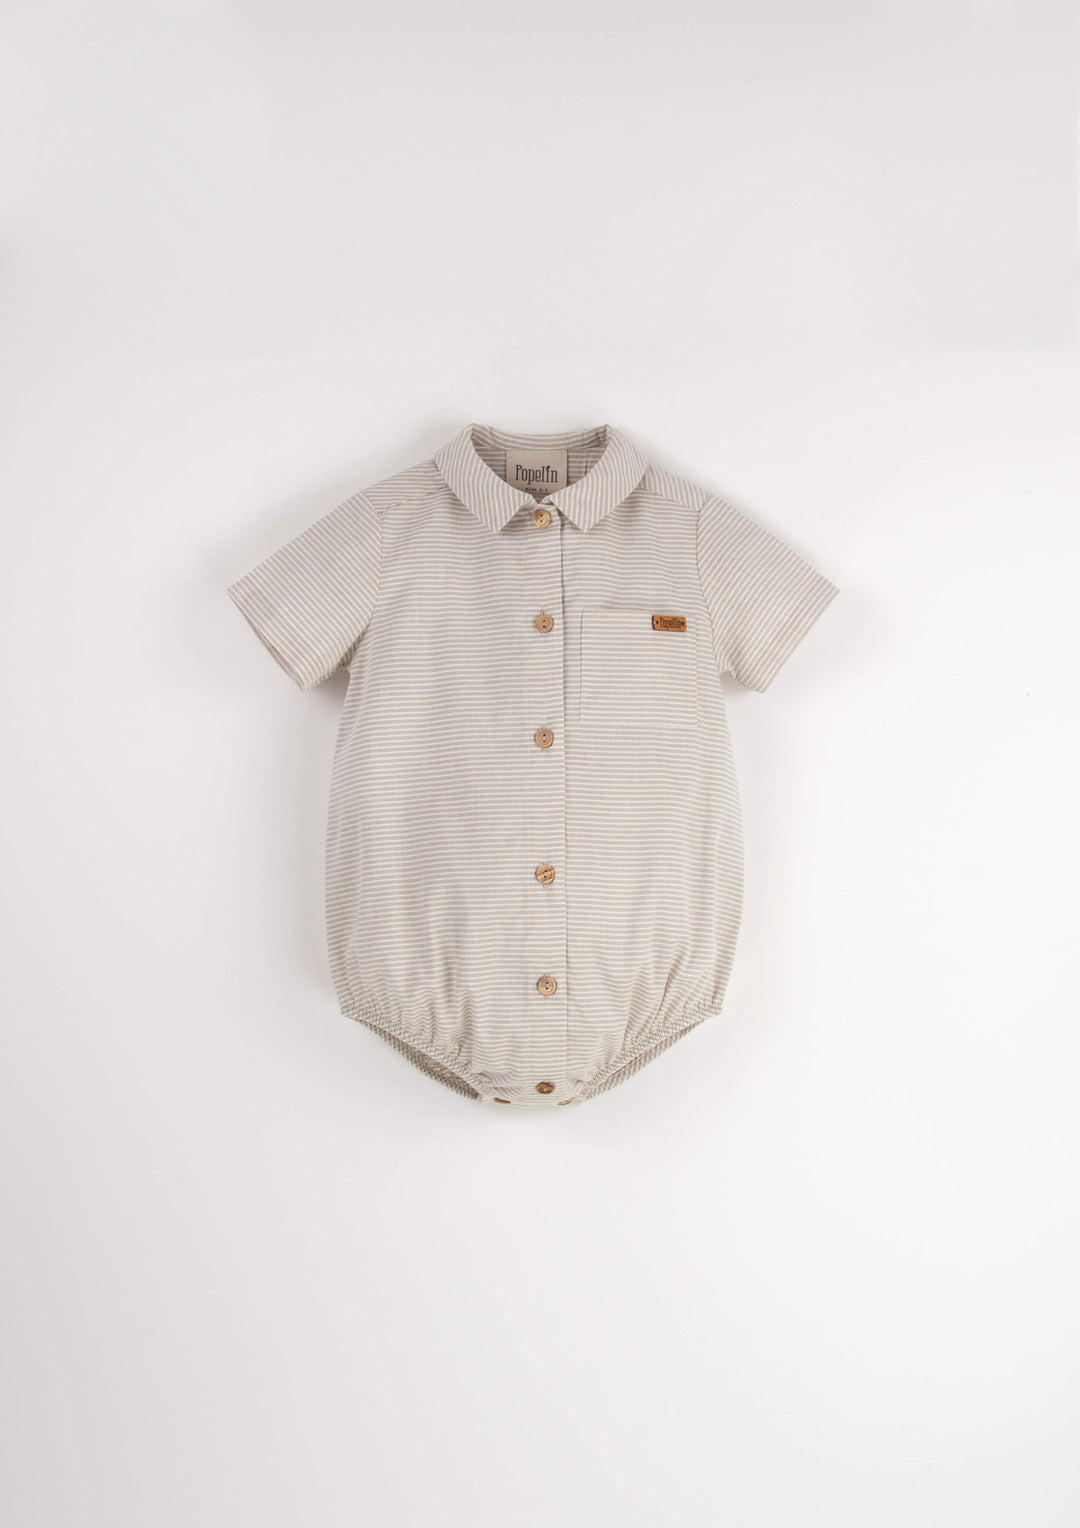 Mod.16.3 Sand striped romper suit with shirt collar